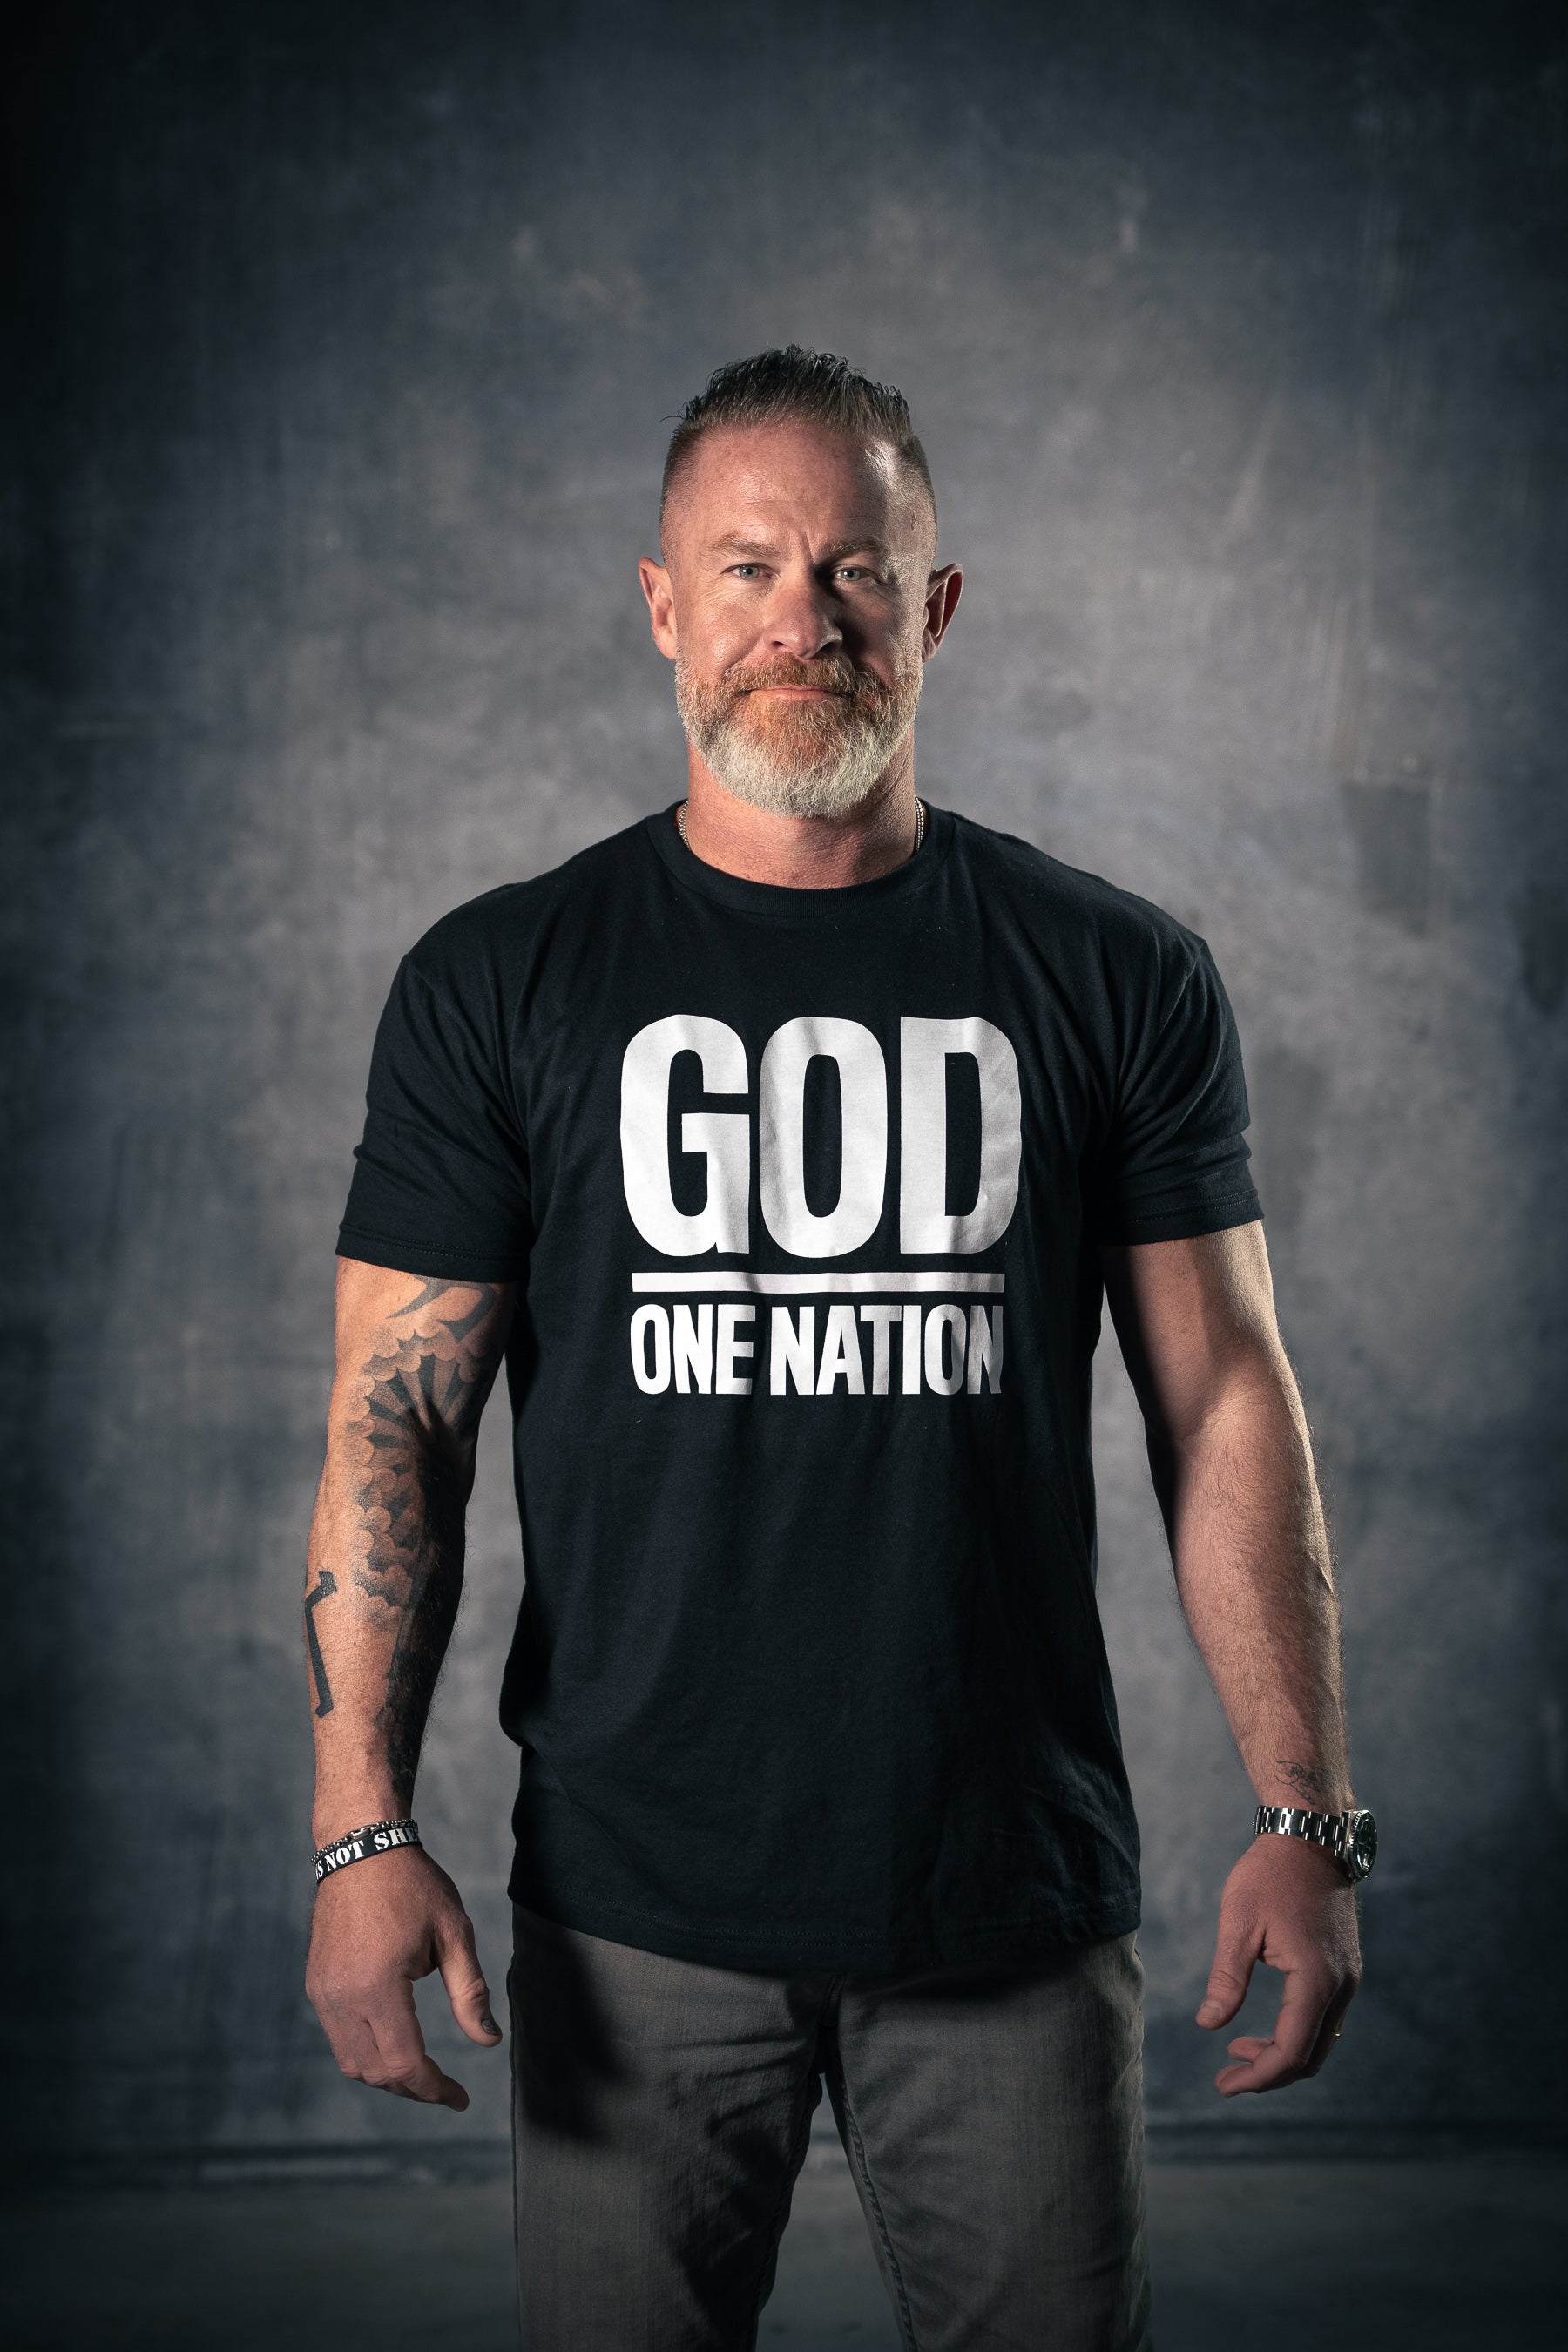 GOD'S NATION Tee - Lions Not Sheep ®